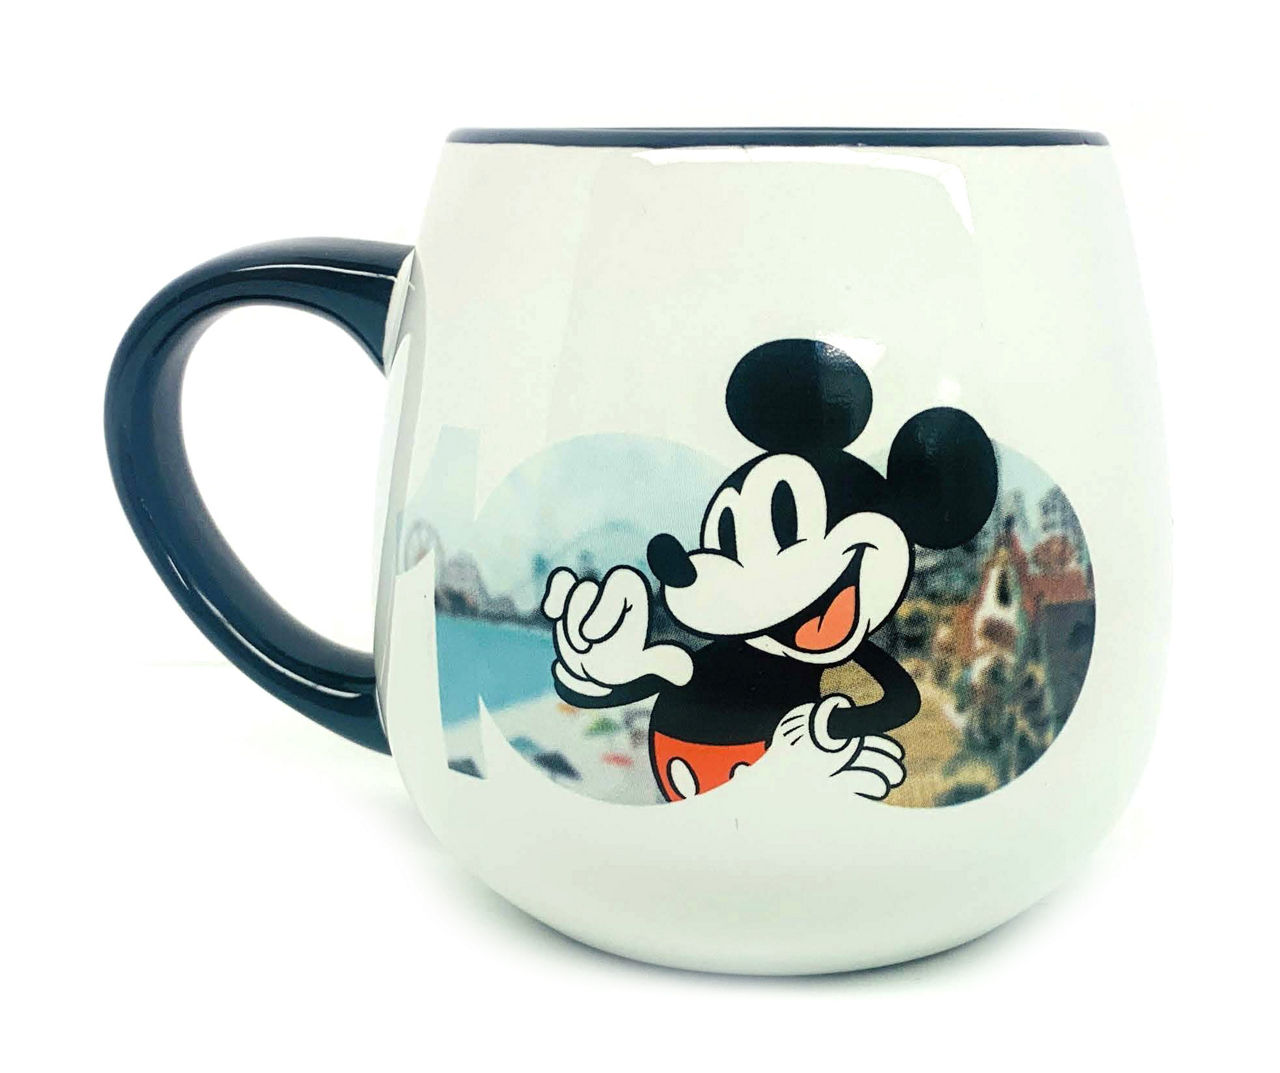 New DISNEY Mickey Mouse Single Serve Coffee Maker Includes Mug New in Box